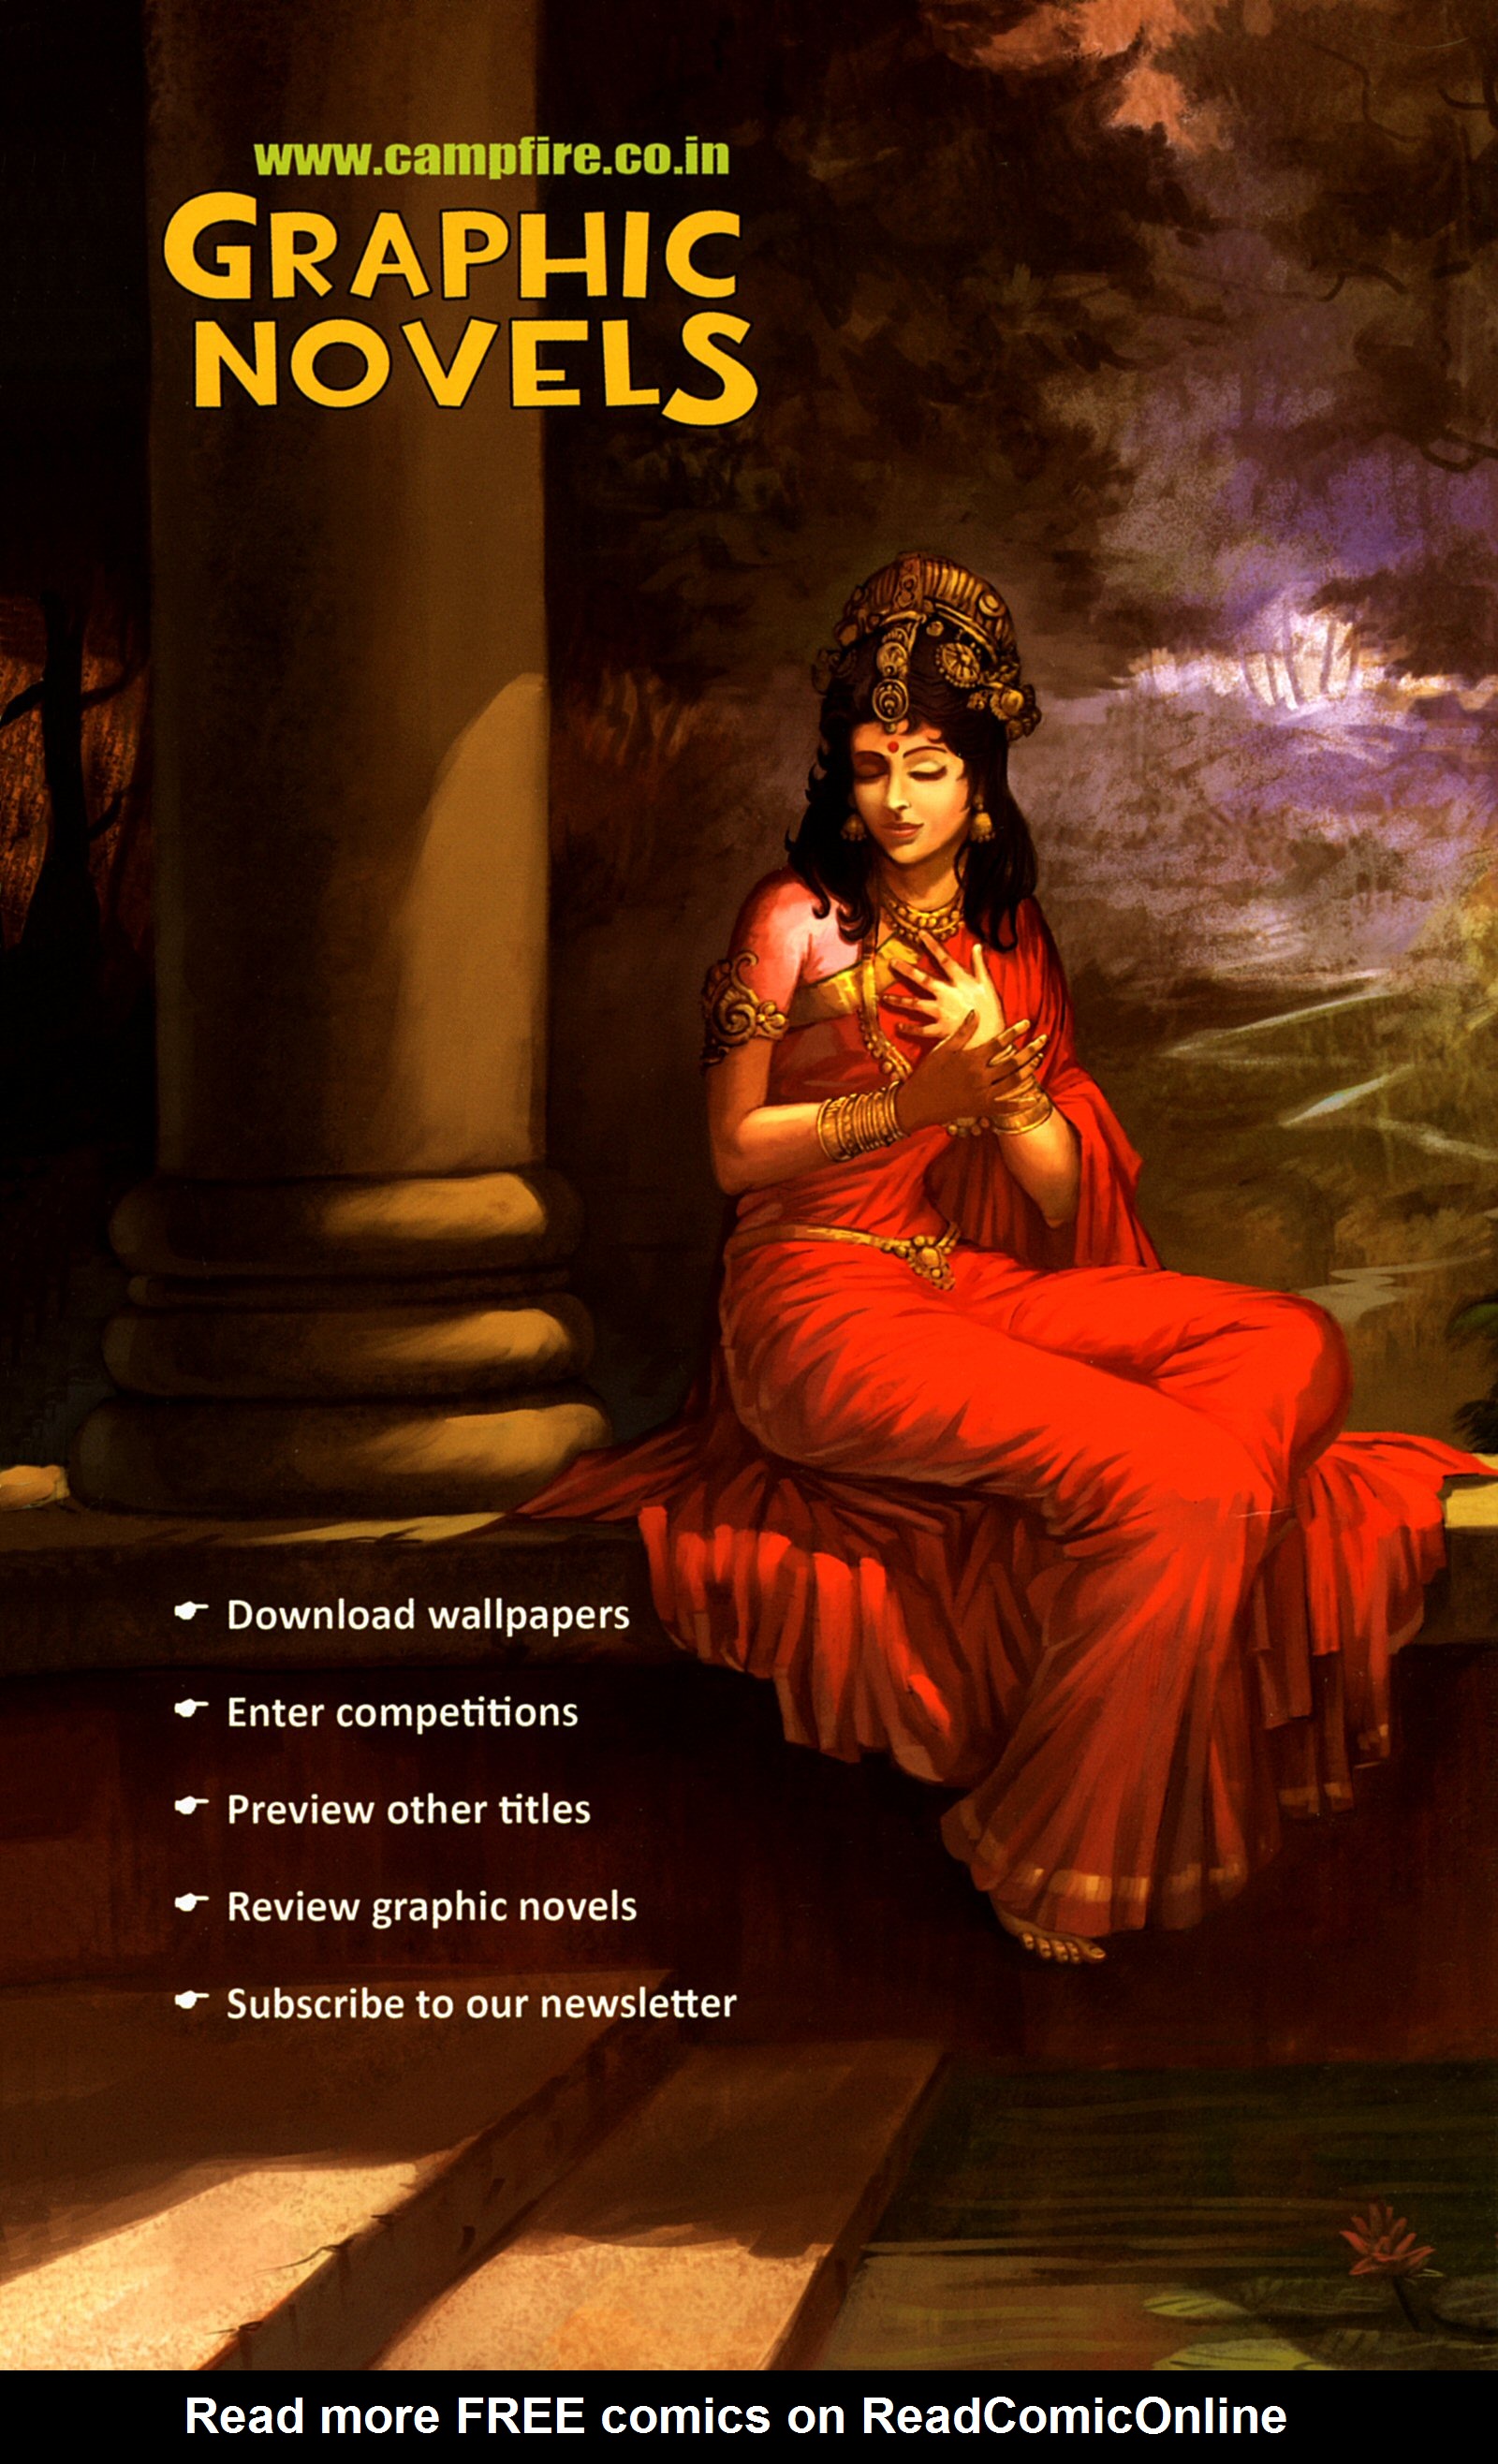 Read online Sita Daughter of the Earth comic -  Issue # TPB - 3